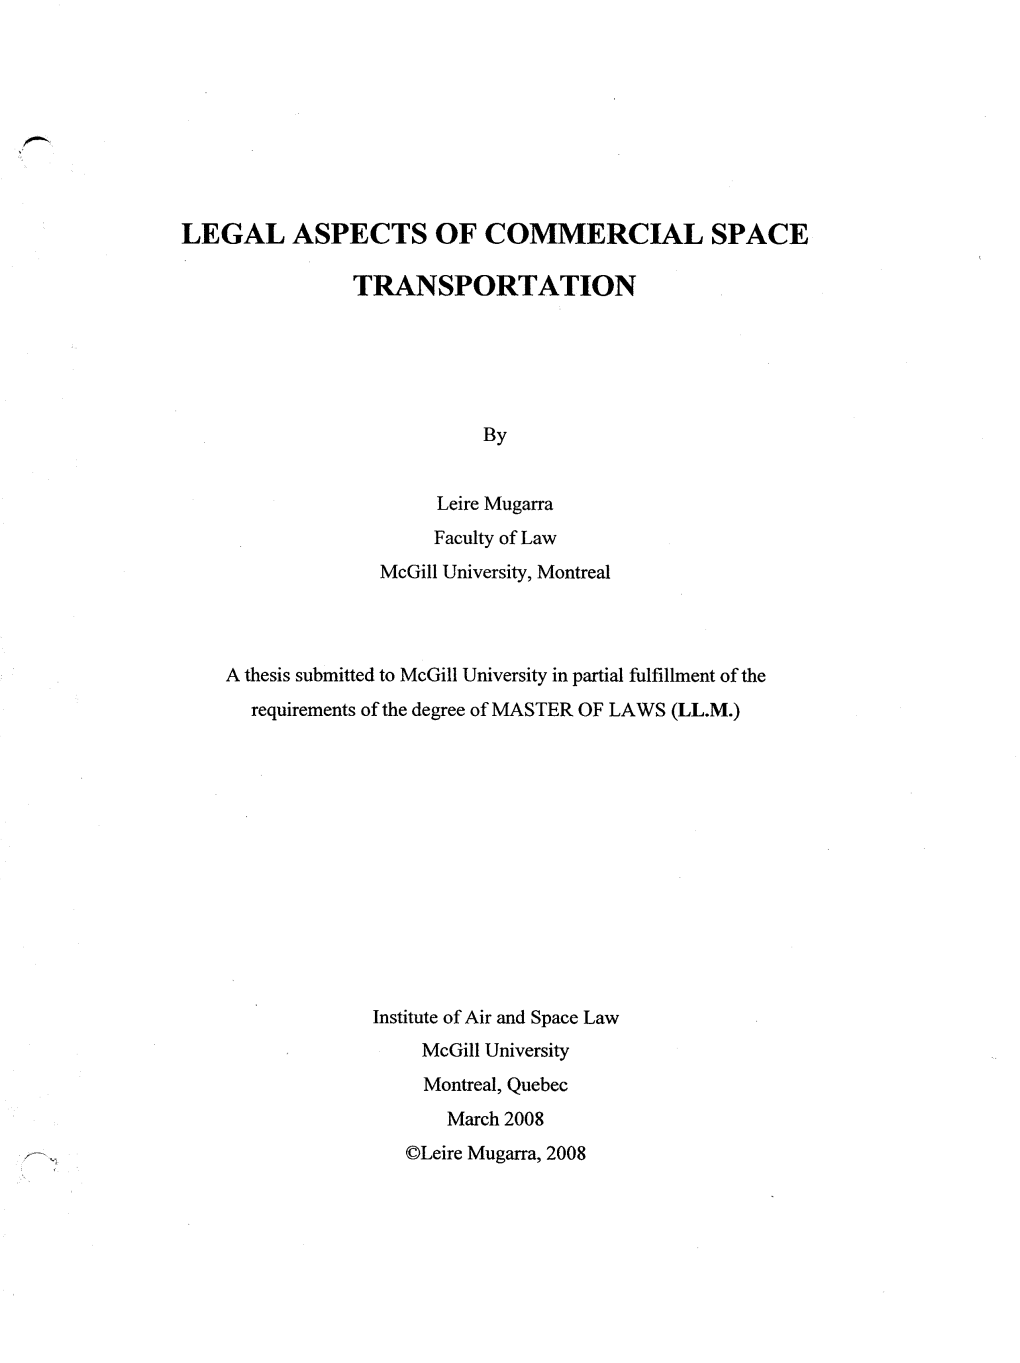 Legal Aspects of Commercial Space Transportation